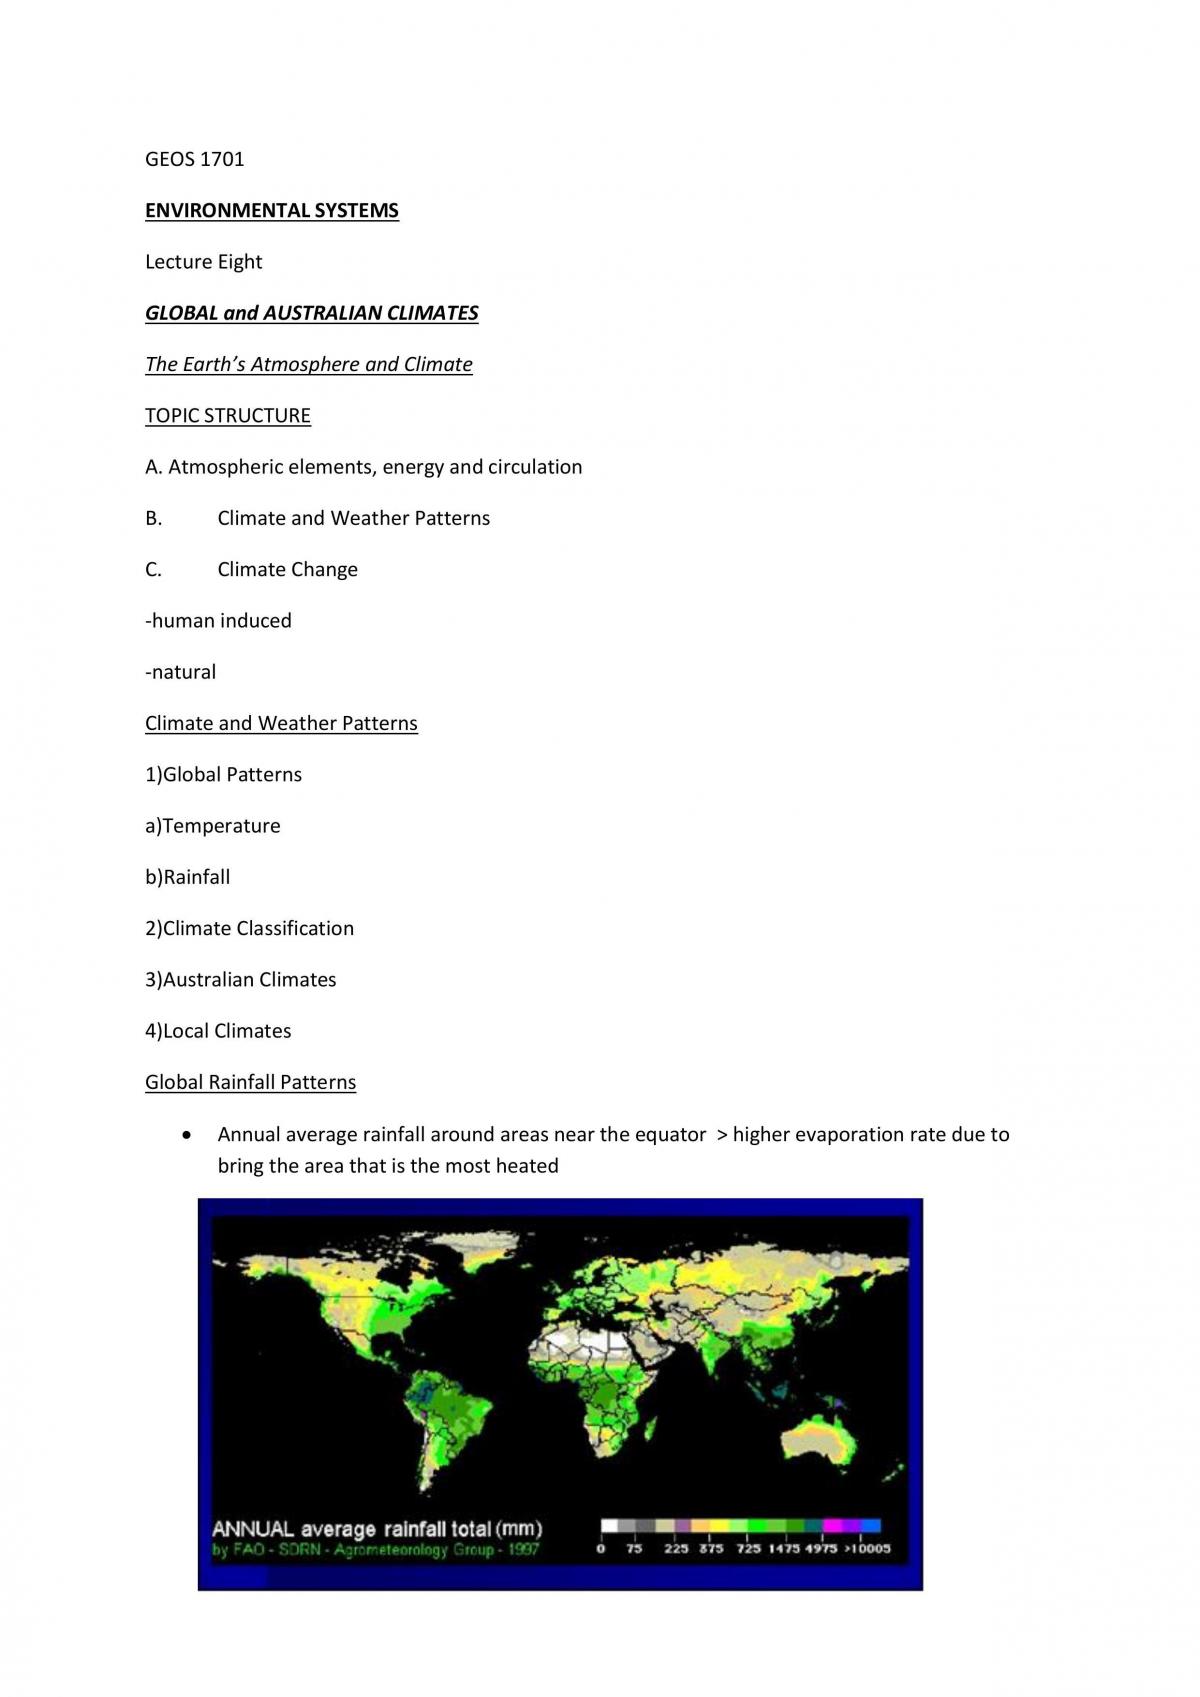 Lecture 8 - Global and Australian Climate Patterns - Page 1